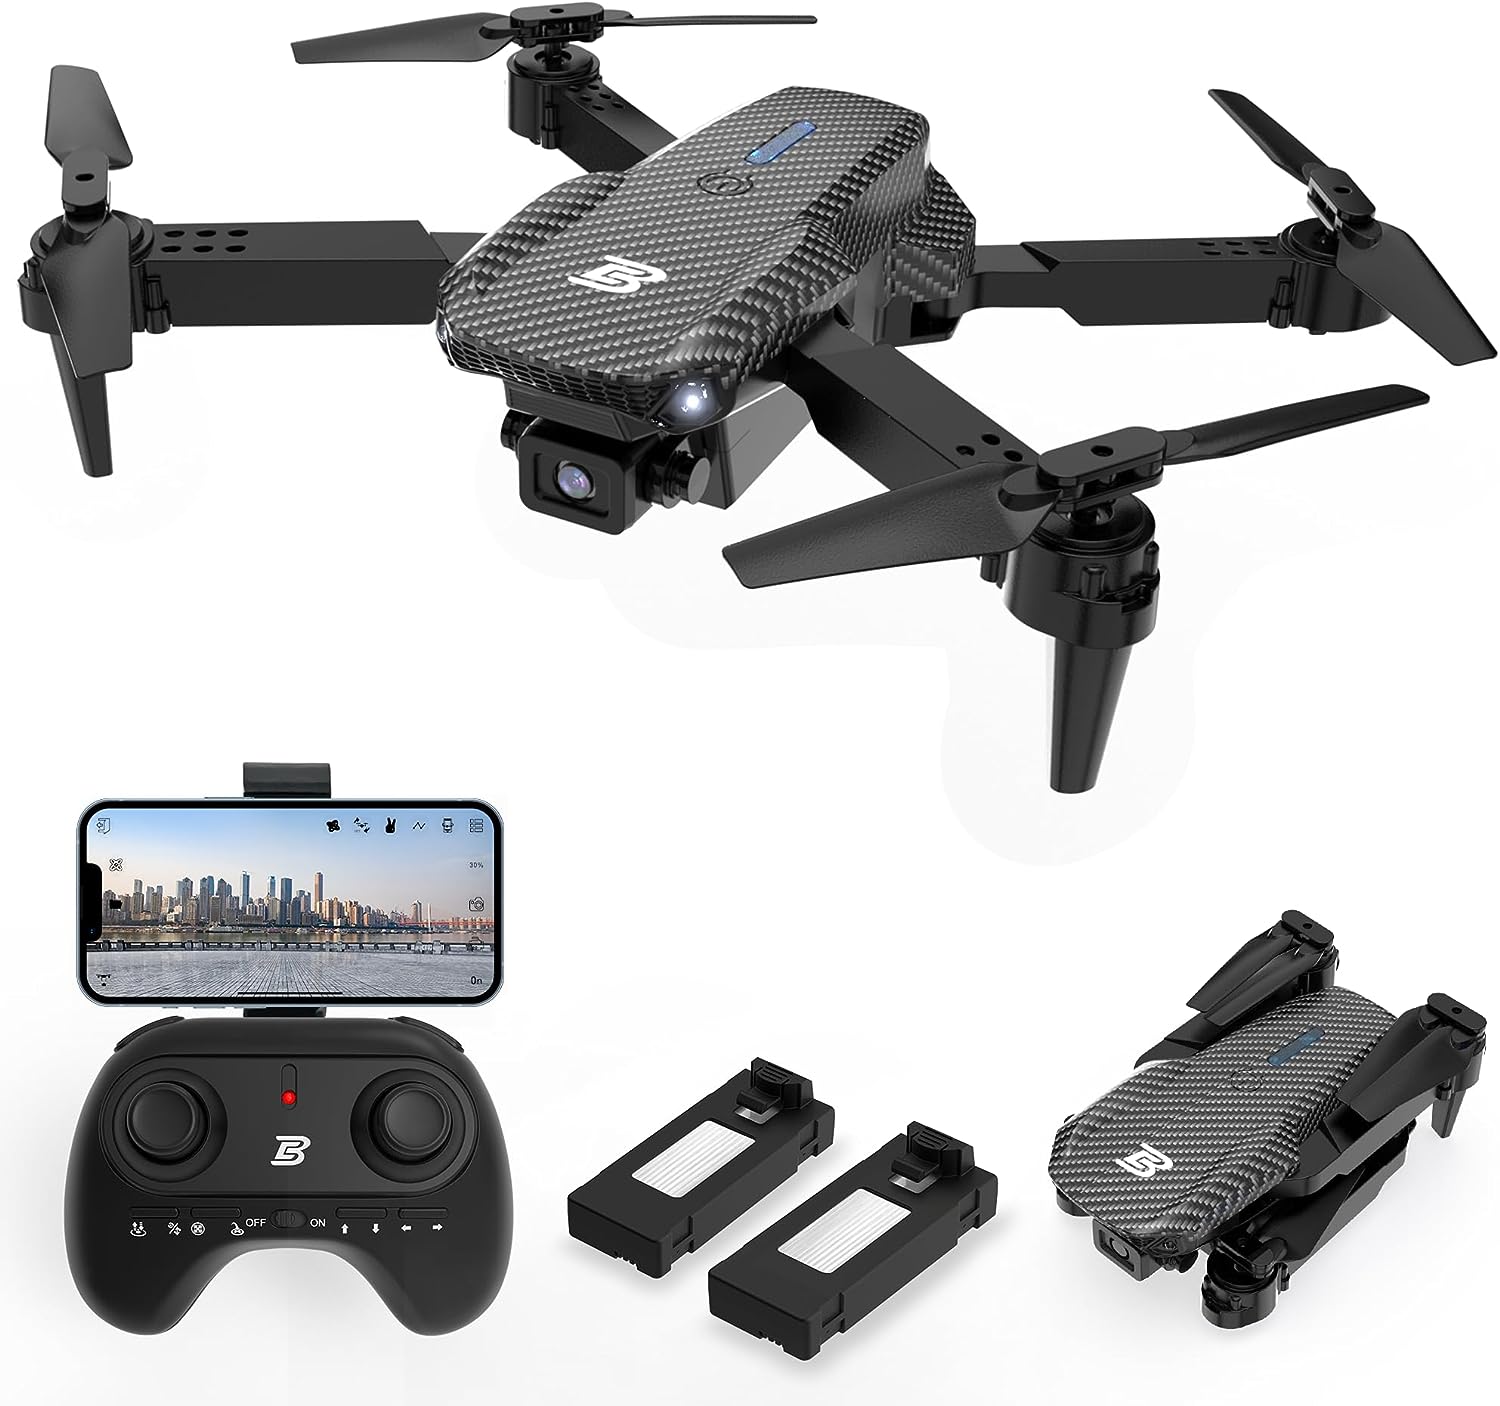 BEZGAR BD101 Drone Review: A Versatile and User-Friendly Choice for Aerial Photography